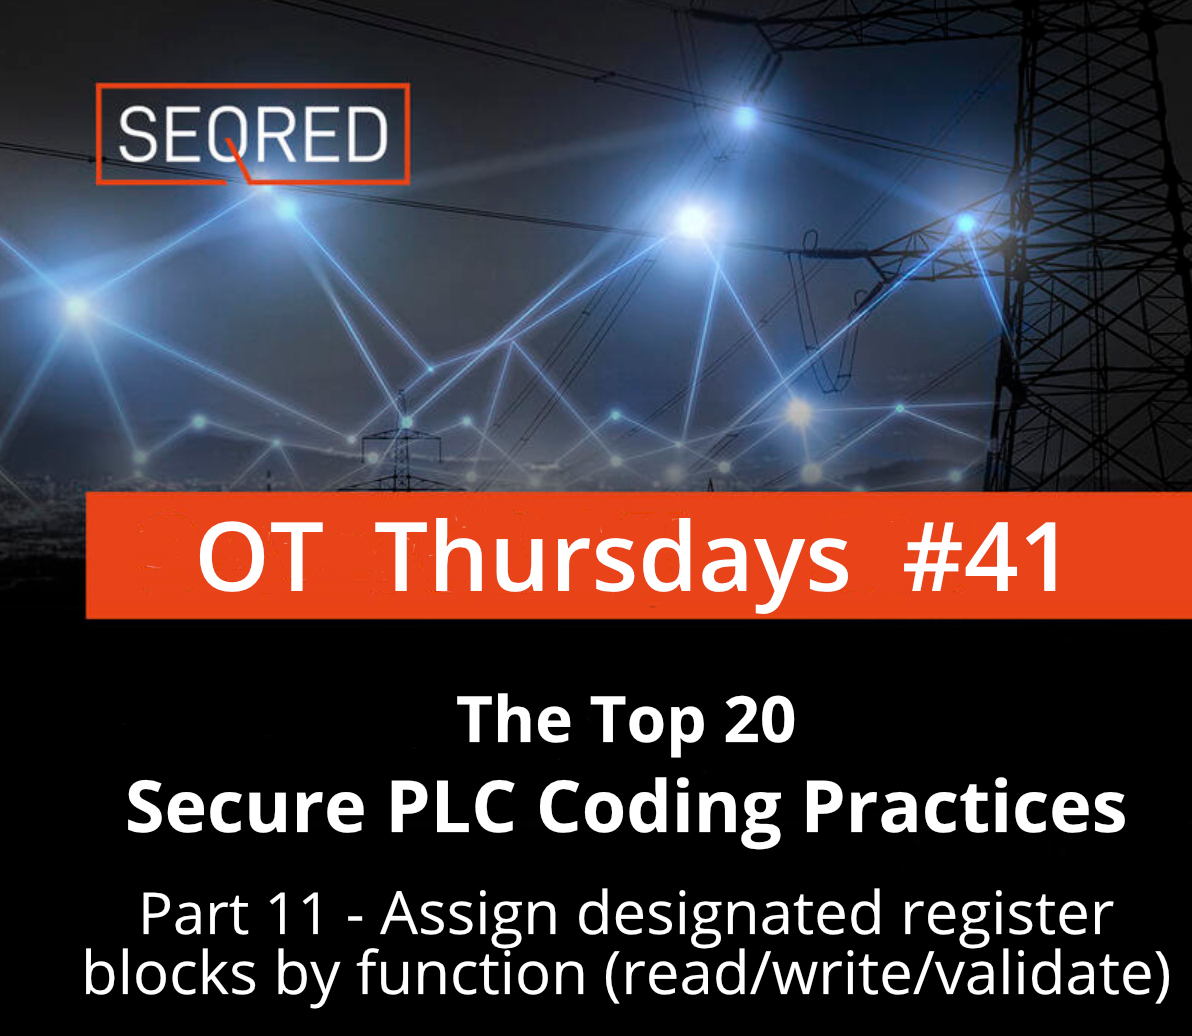 The Top 20 Secure PLC Coding Practices. Part 11 - Assign designated register blocks by function (read/write/validate)